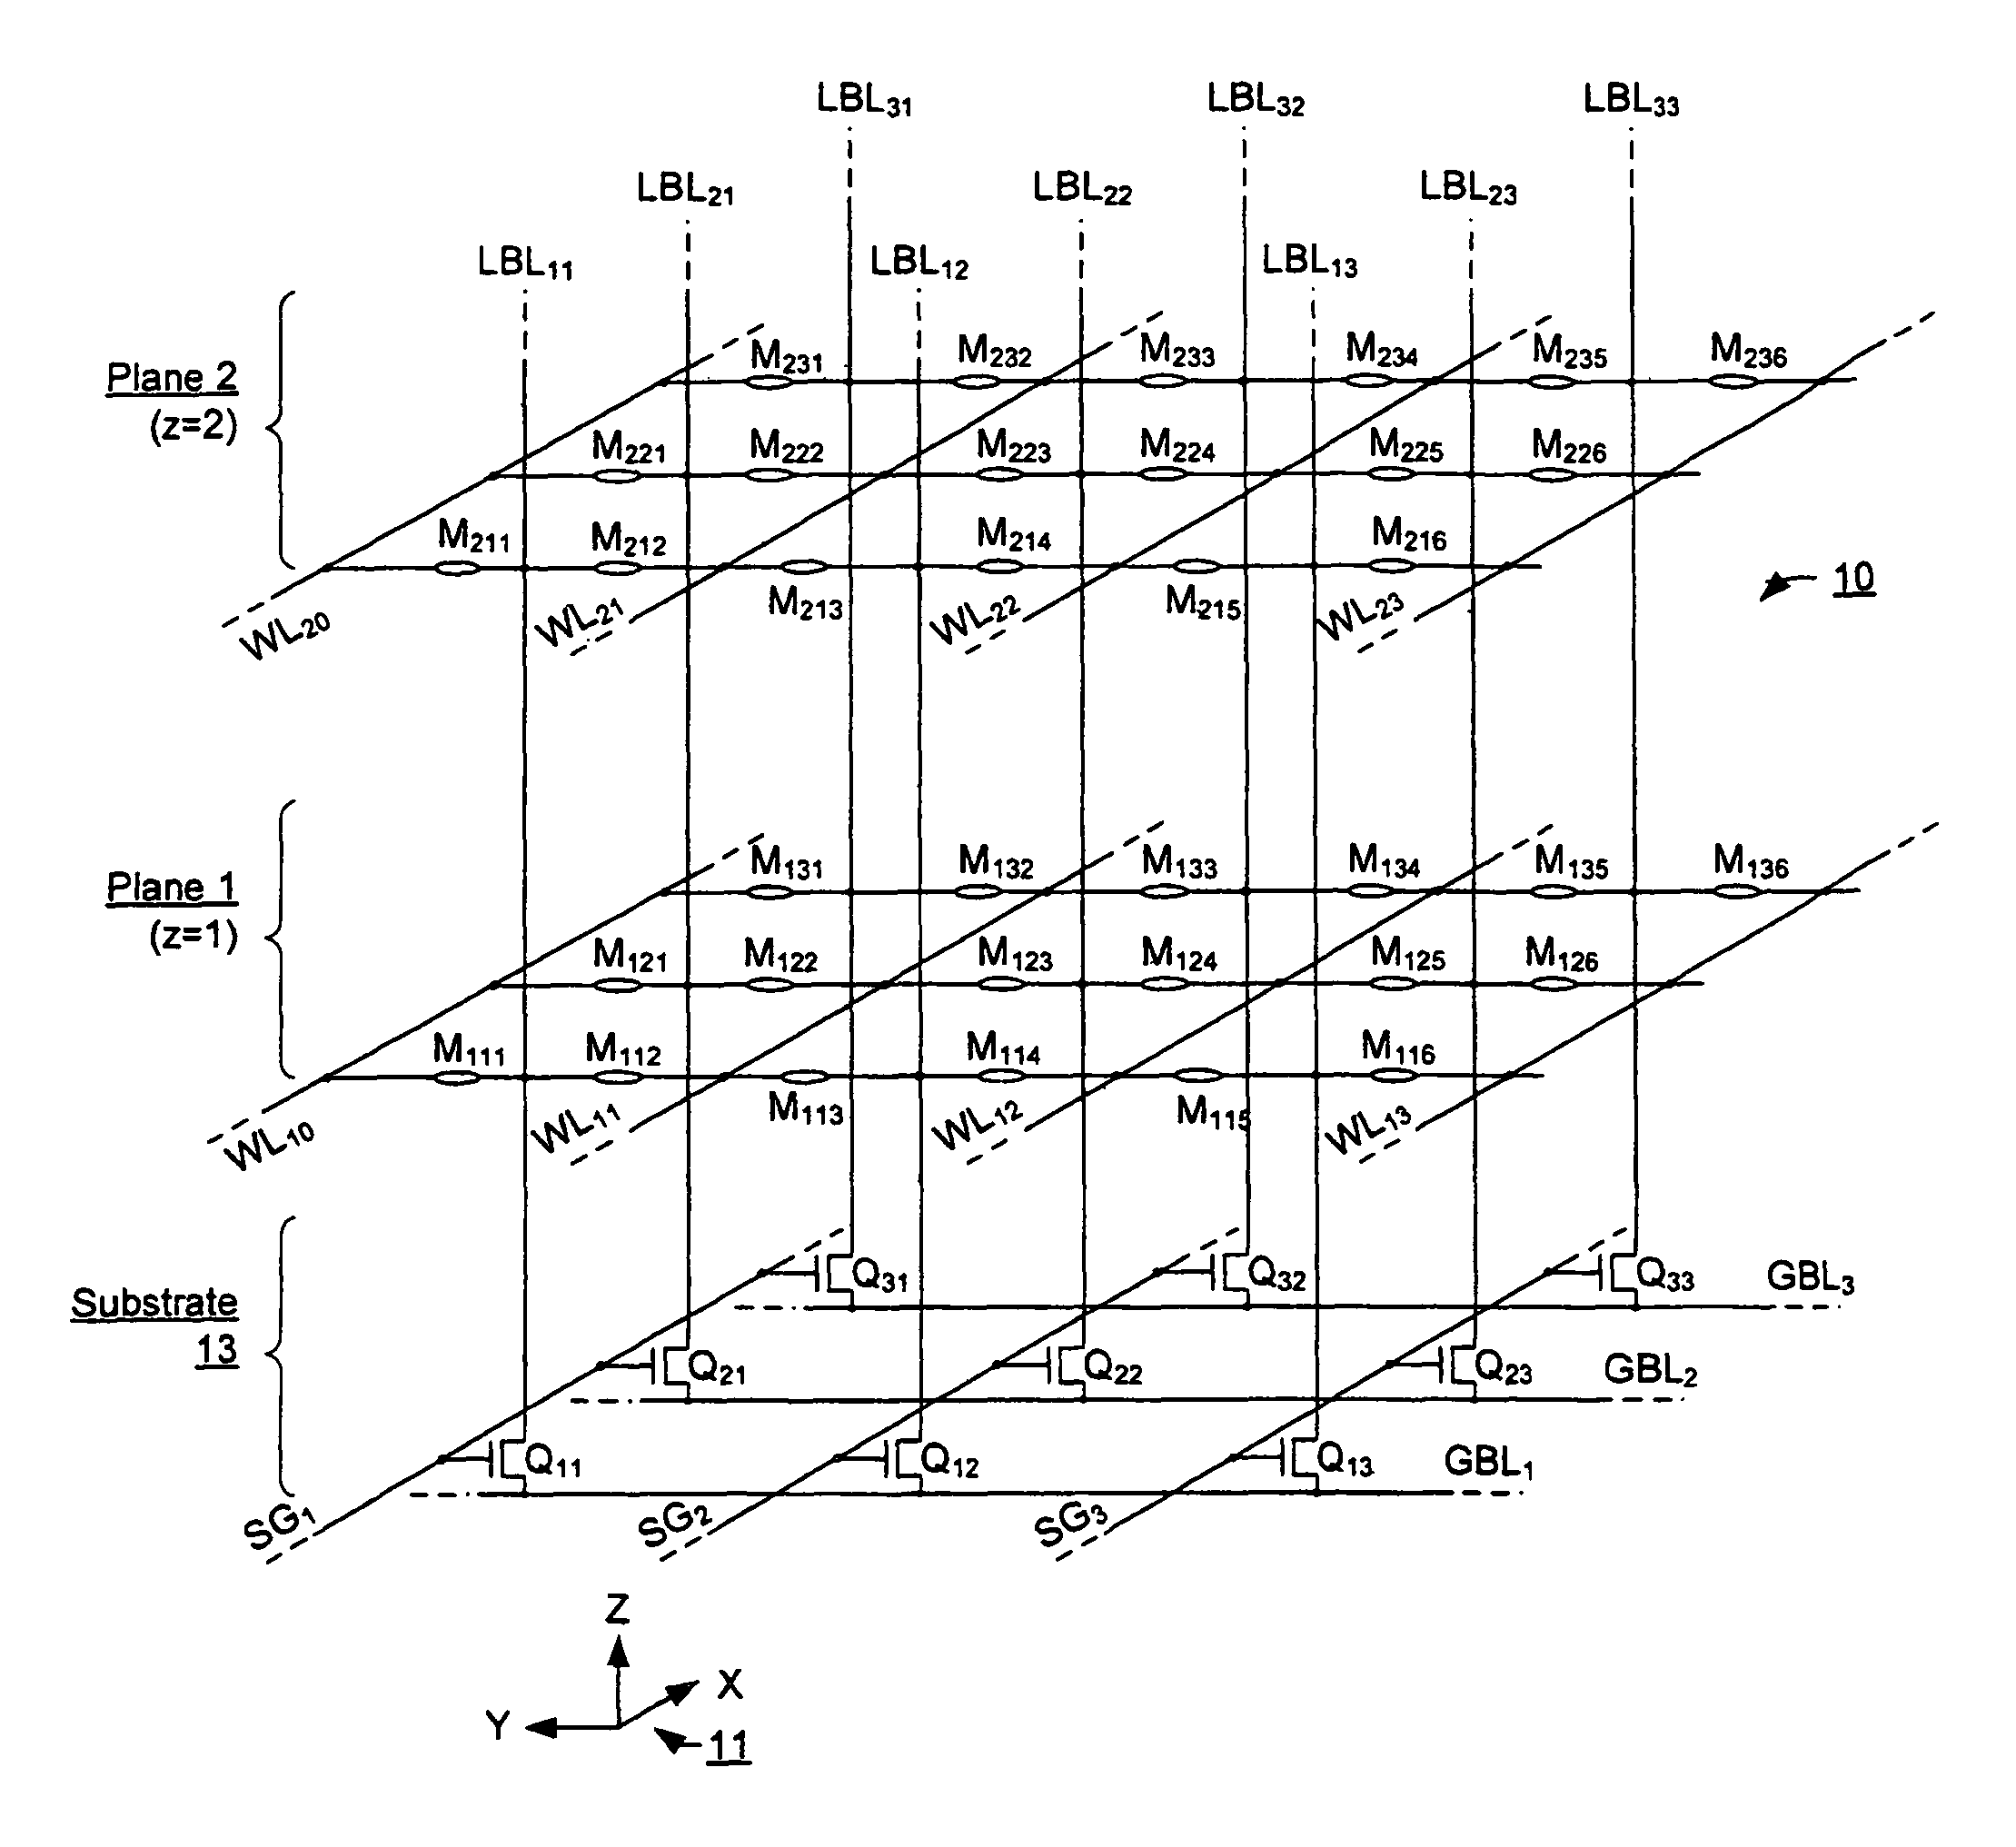 Three-dimensional array of re-programmable non-volatile memory elements having vertical bit lines and a single-sided word line architecture